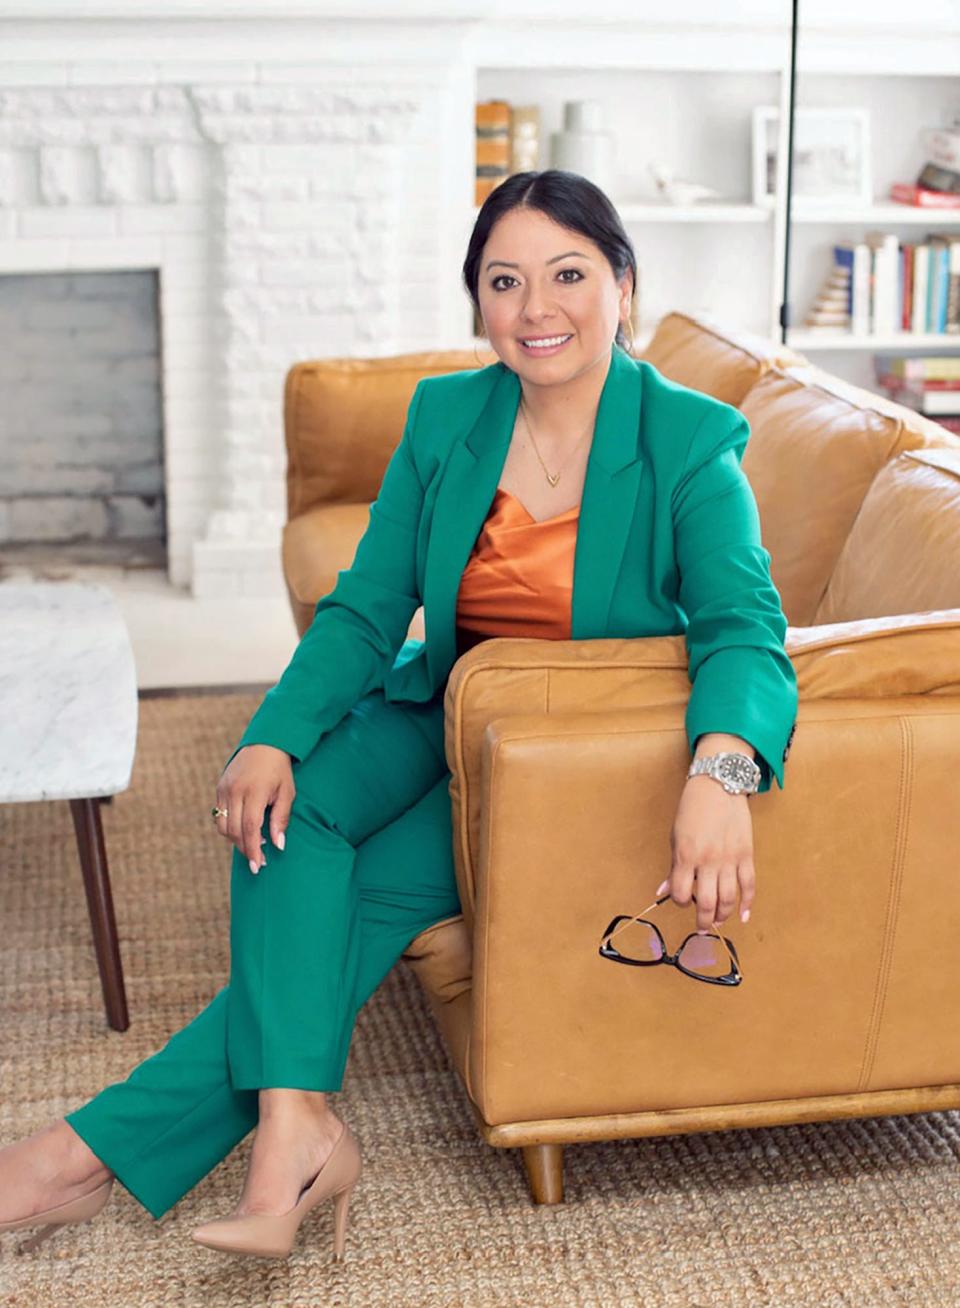 Veronica Galaviz is a real estate agent with Verbode Group in OKC and a member of the Oklahoma City chapter of the National Association of Hispanic Real Estate Professionals.